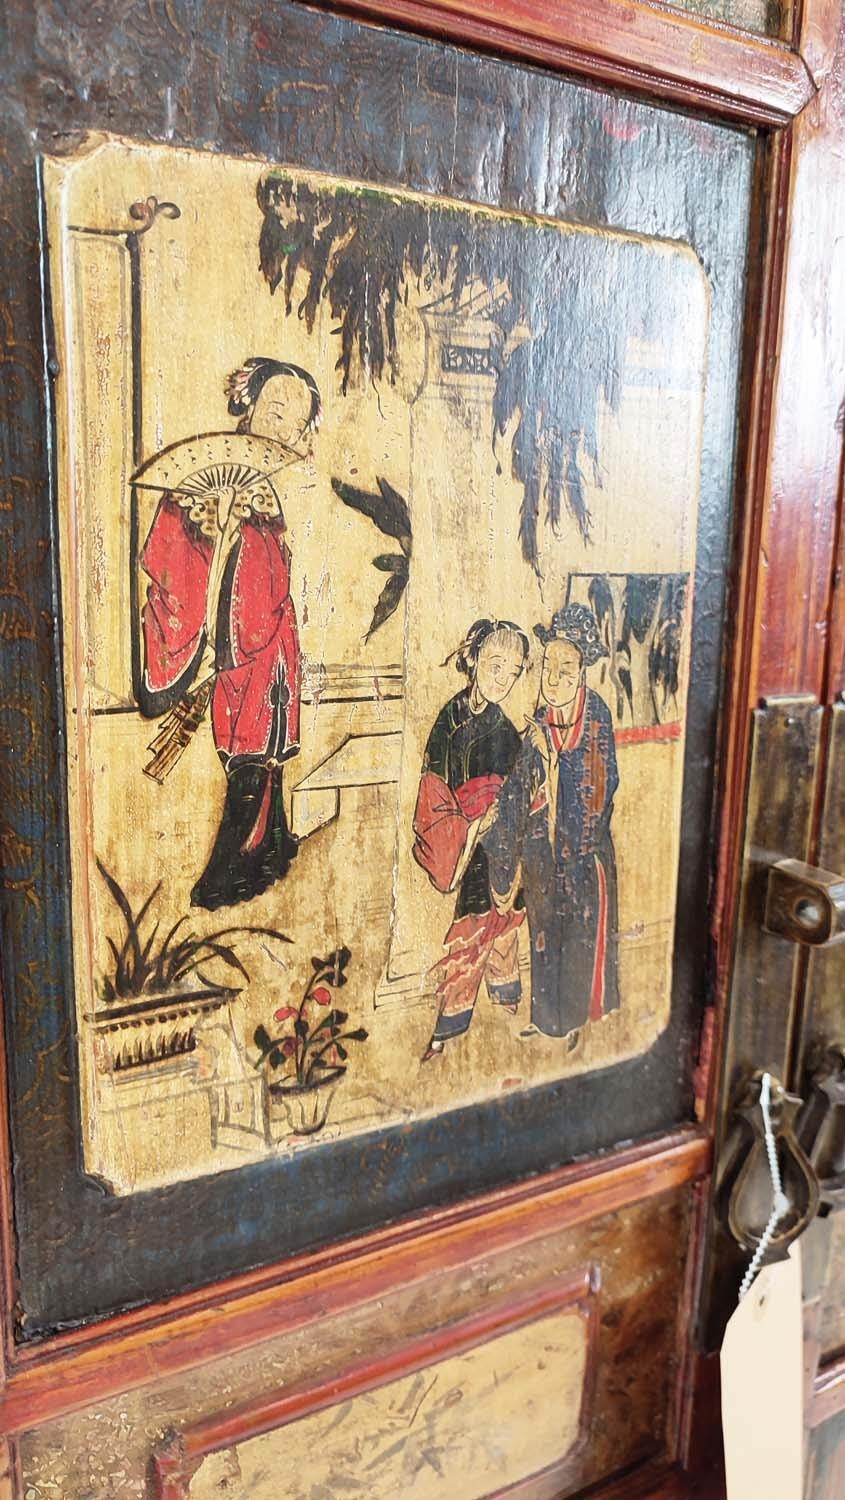 CHINESE WEDDING CABINET, in a decorative red lacquer finish depicting figural scenes and floral - Image 5 of 9